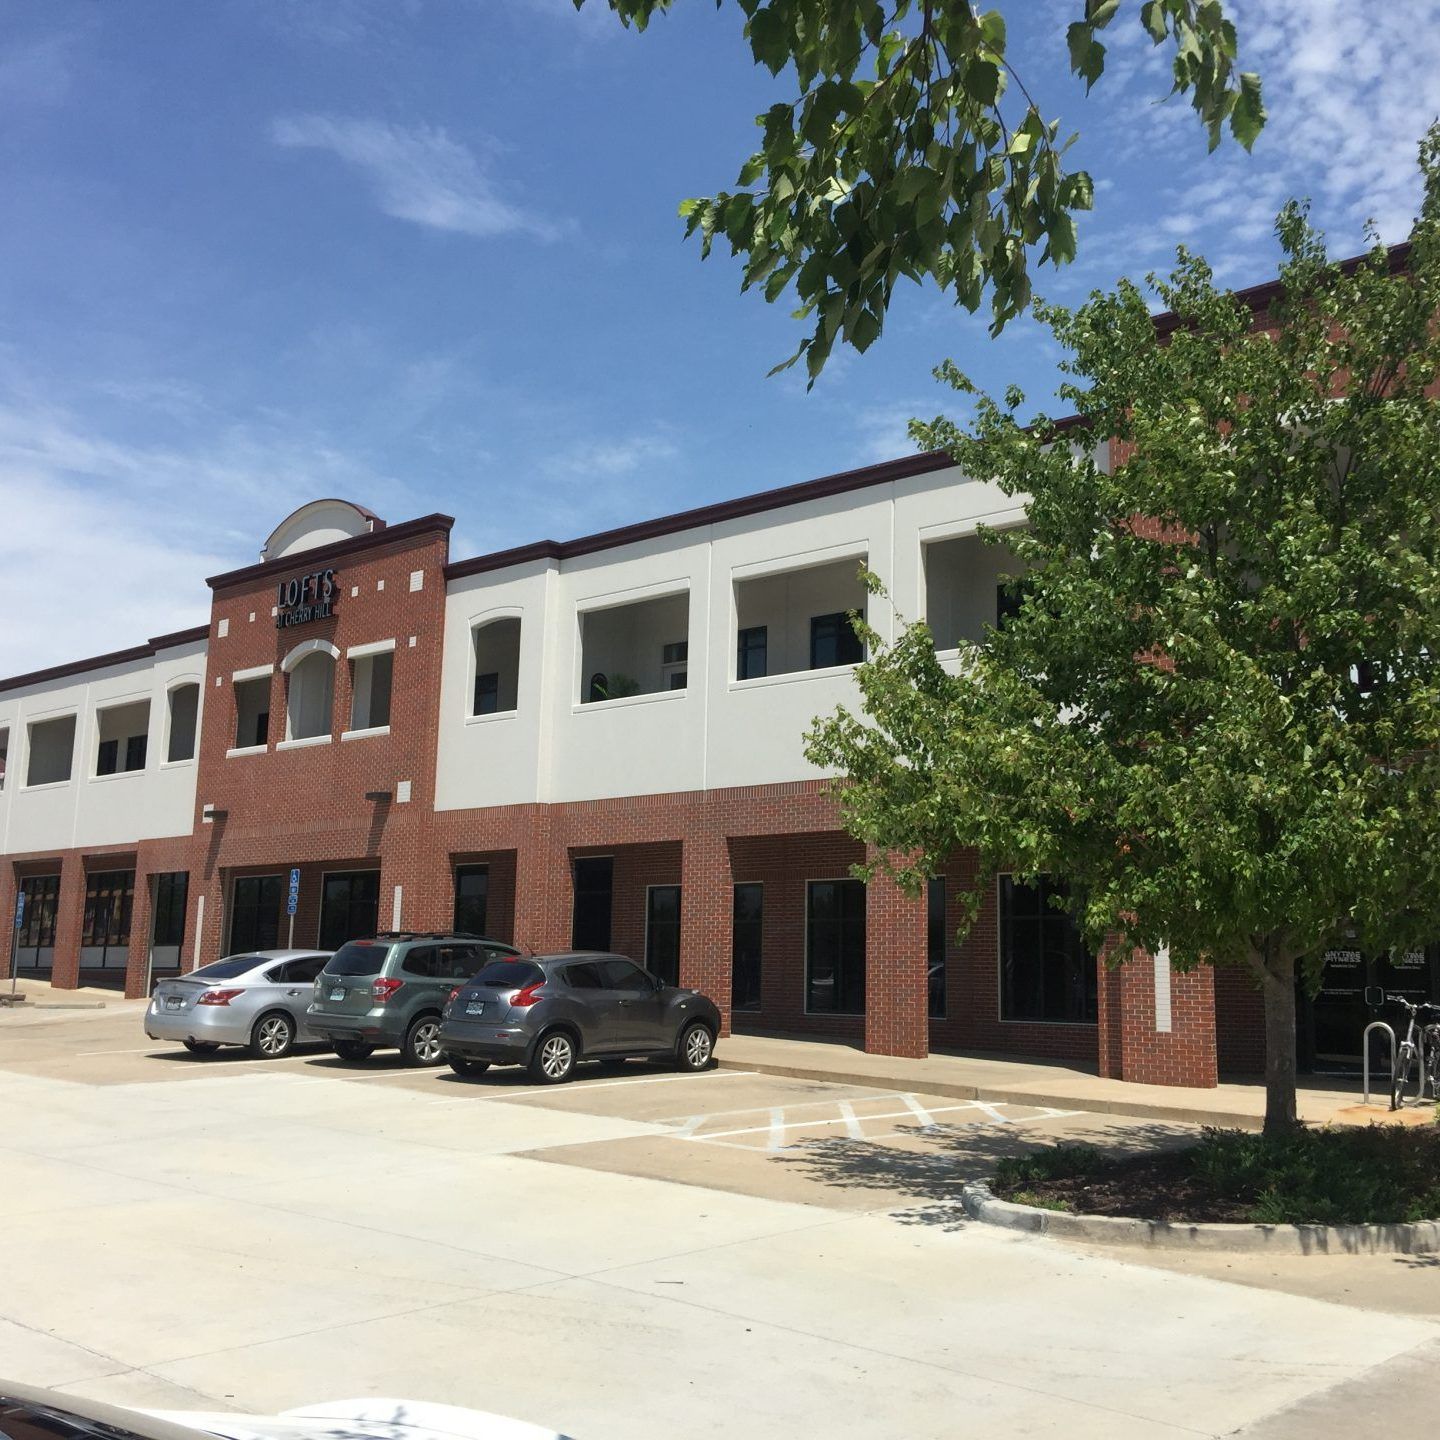 The Lofts at Cherry Hill Are One of Several Columbia, MO Apartment Locations